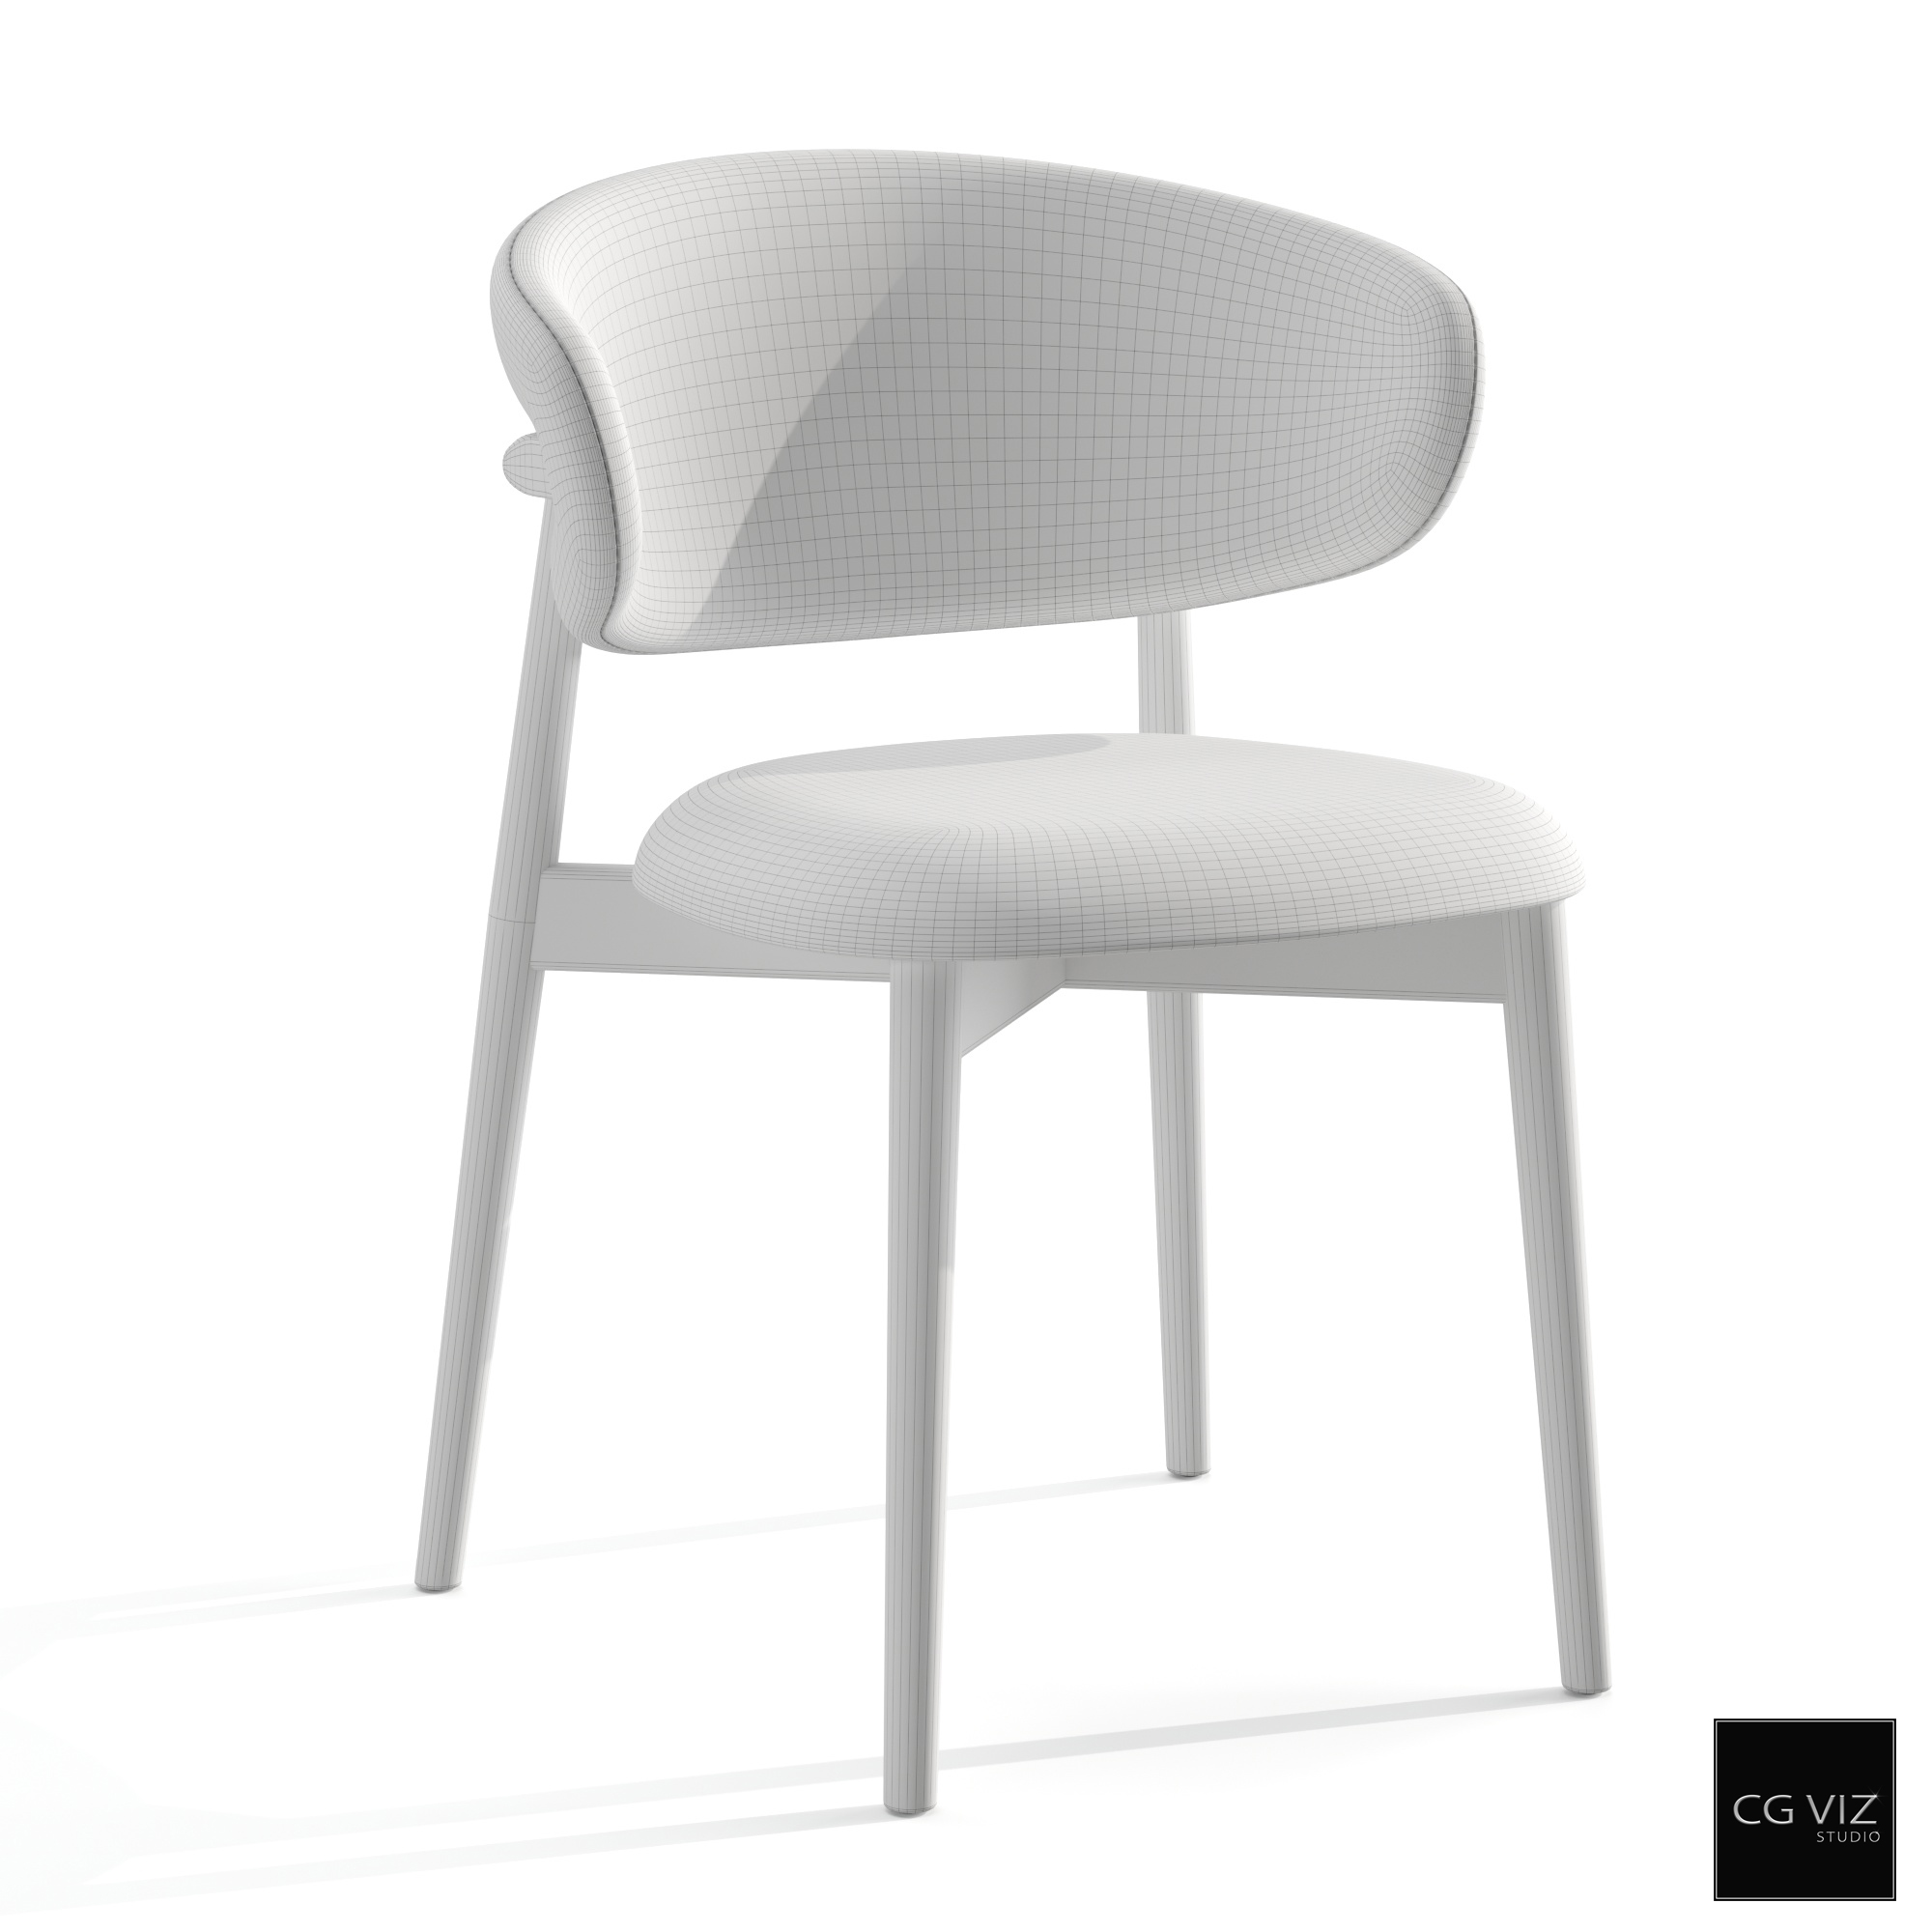 Wireframe View of Calligaris Oleandro Woodenbase Chair 3D Model